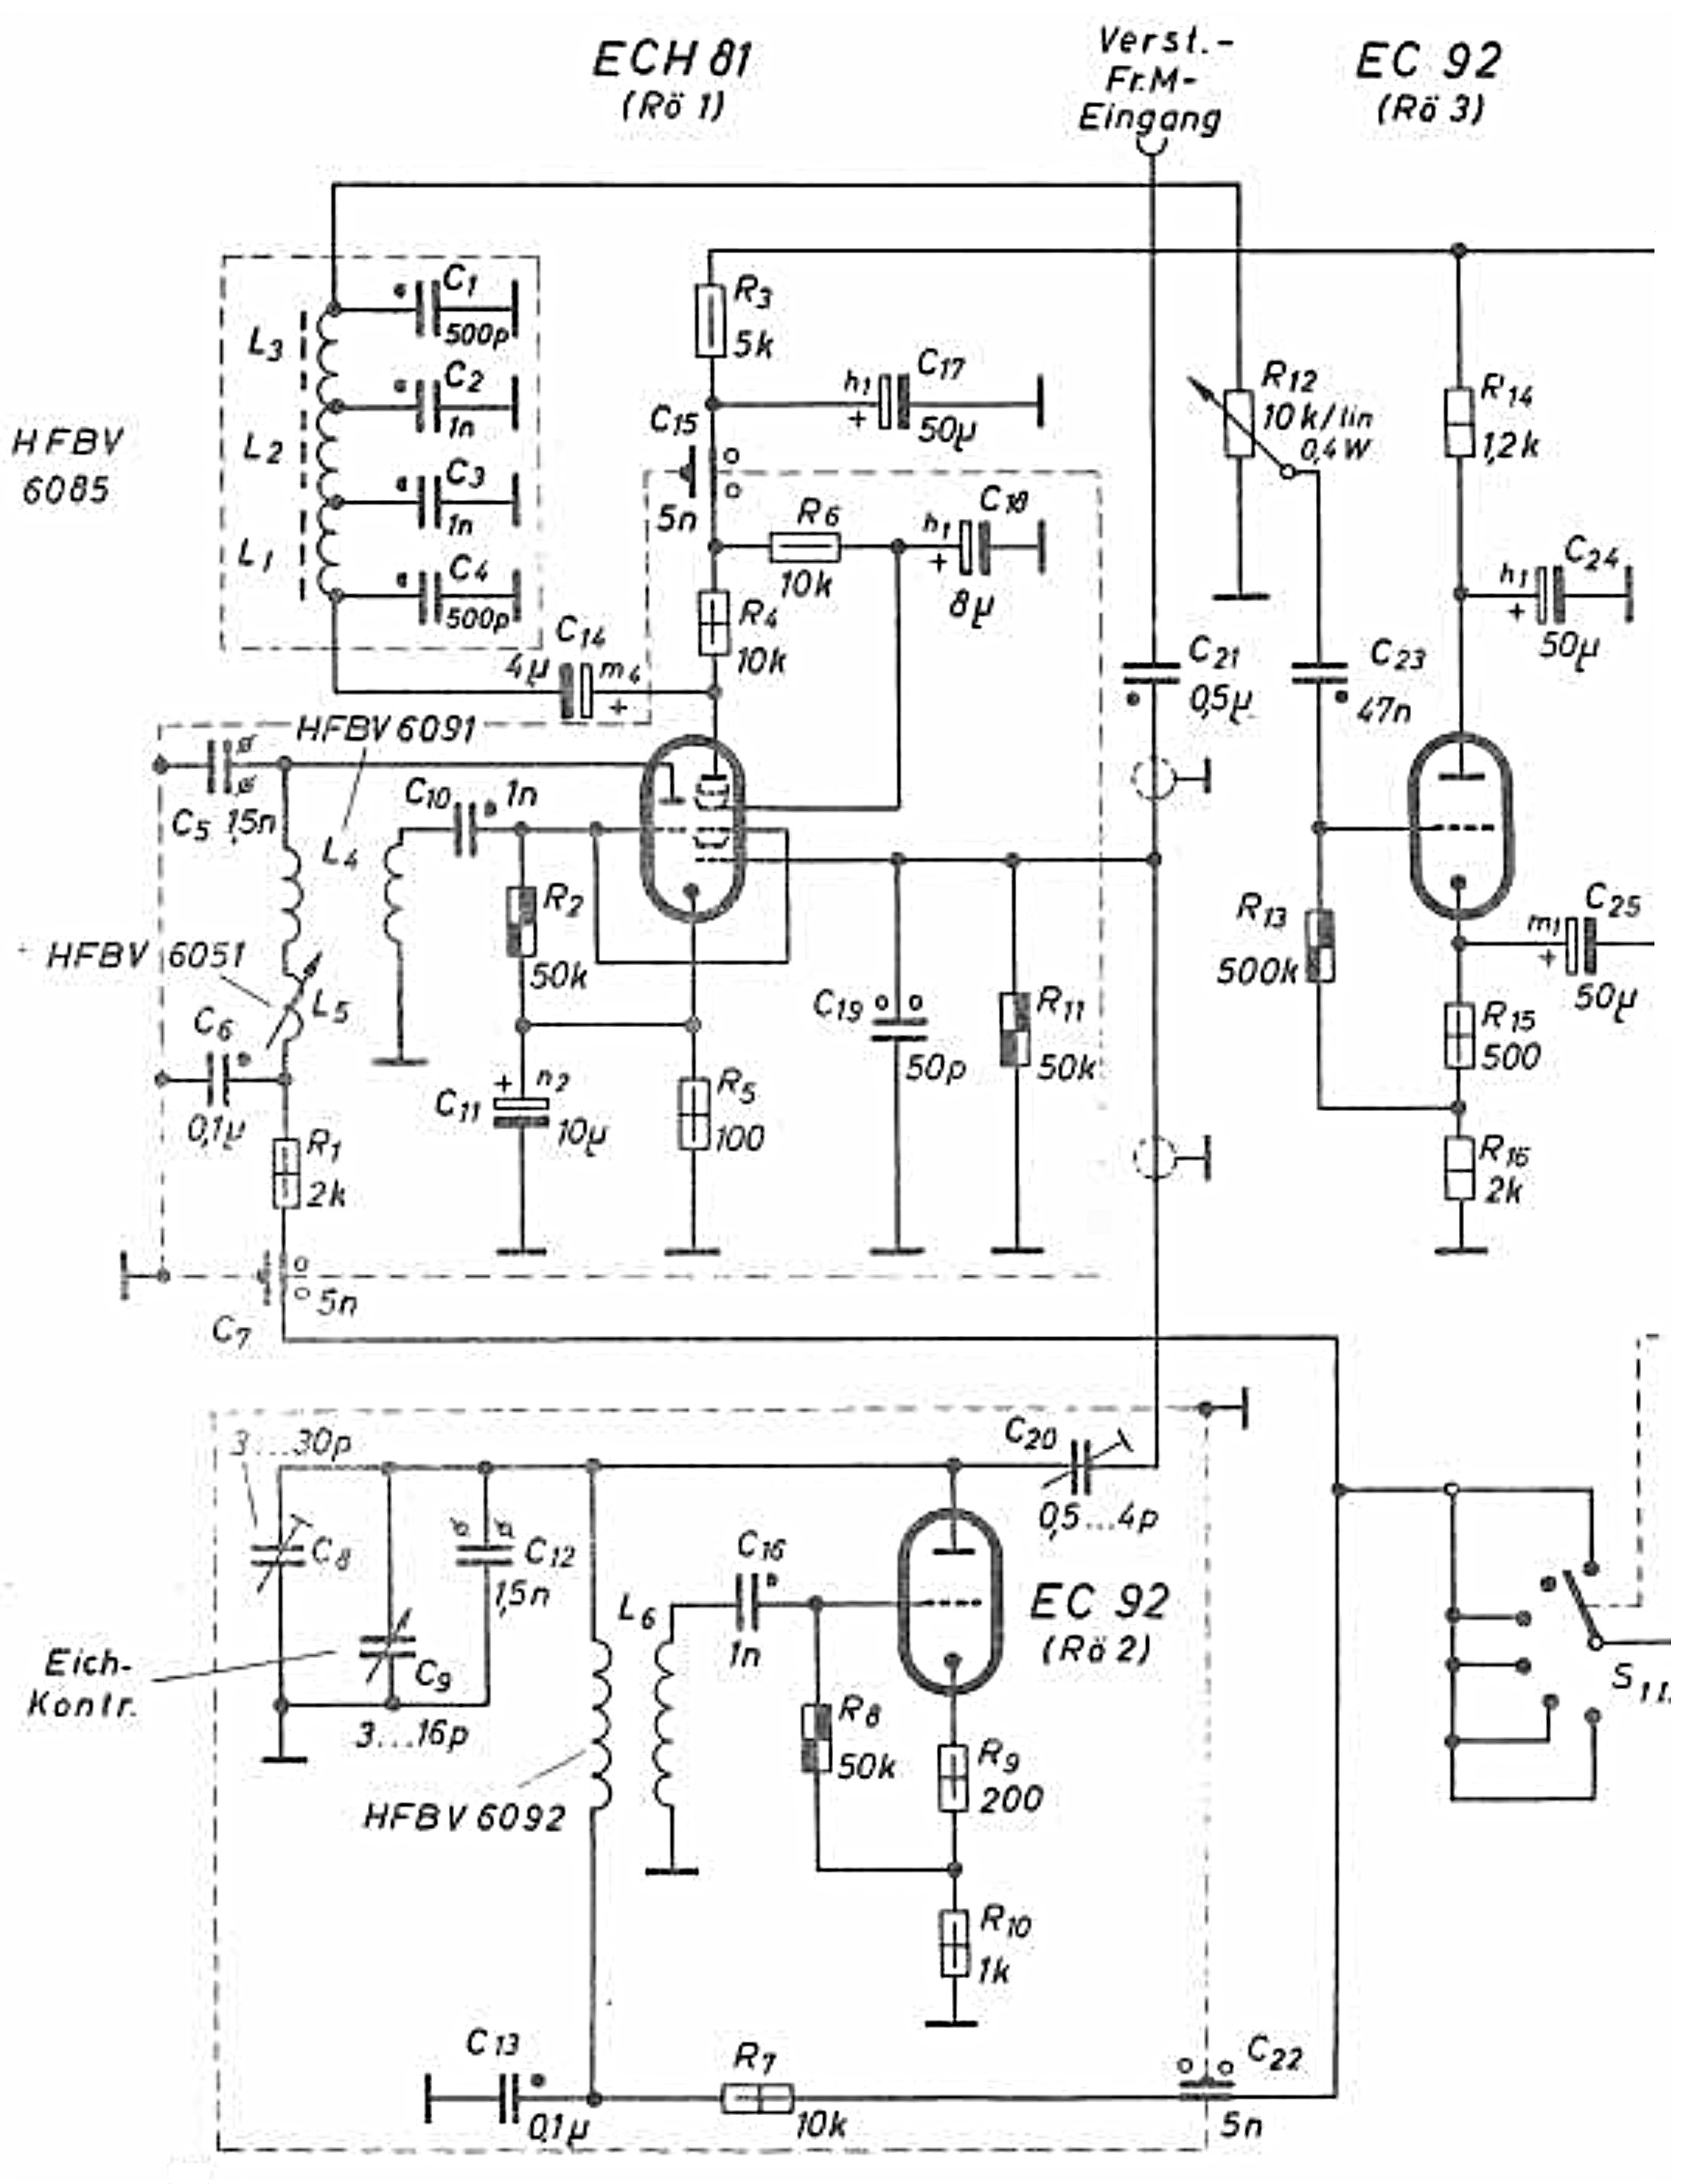  Extract from the circuit diagram of the model 295A.